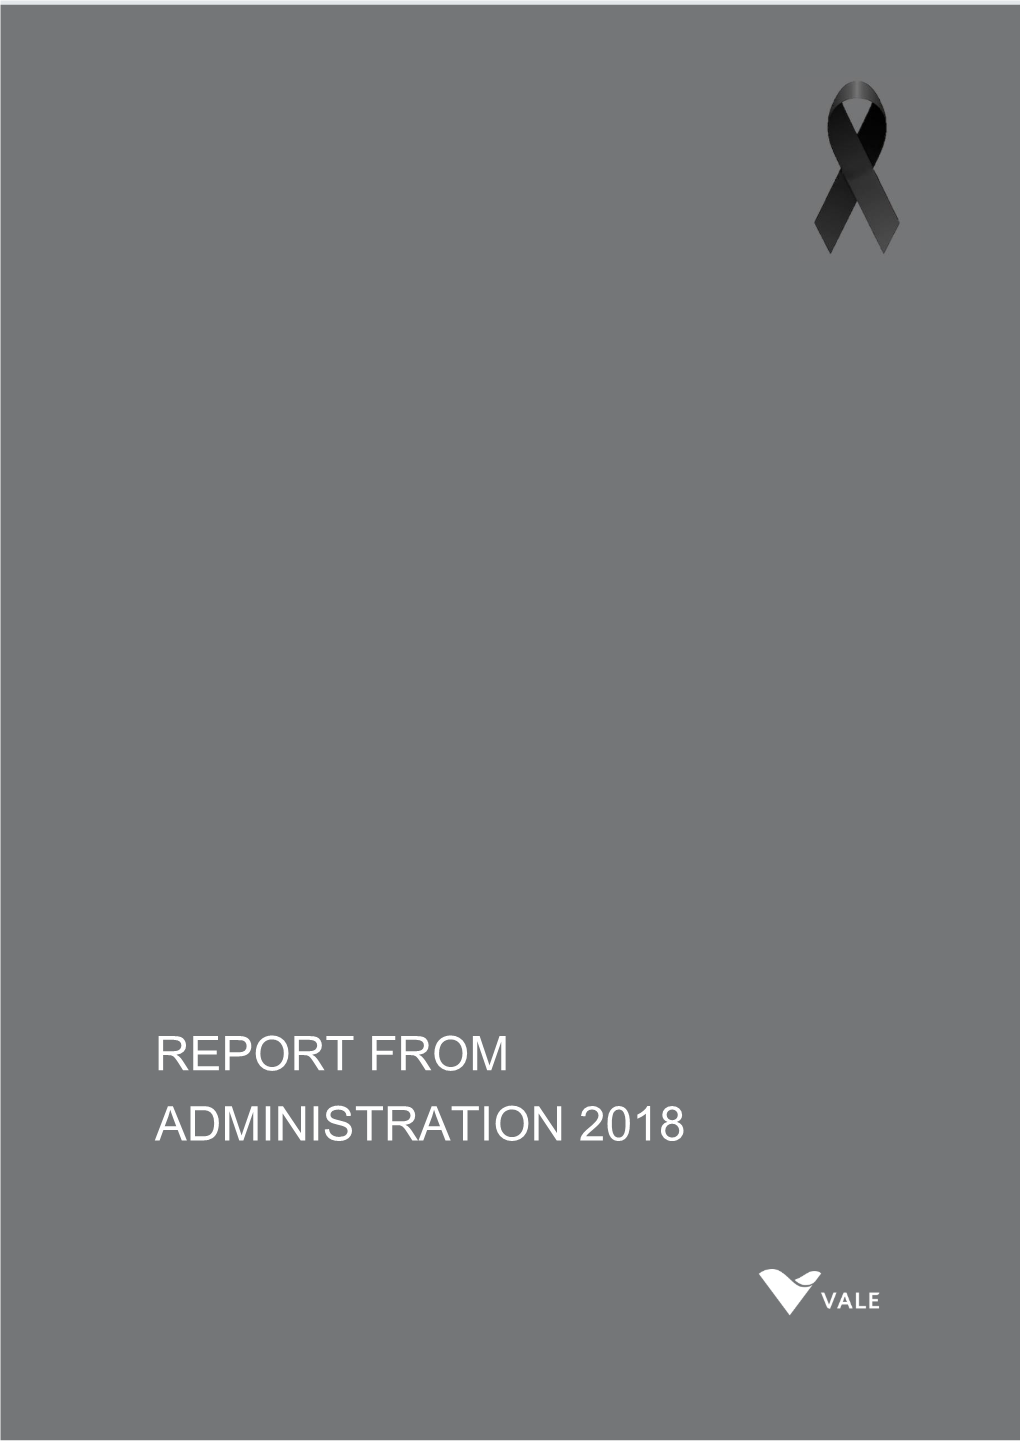 Report from Administration 2018